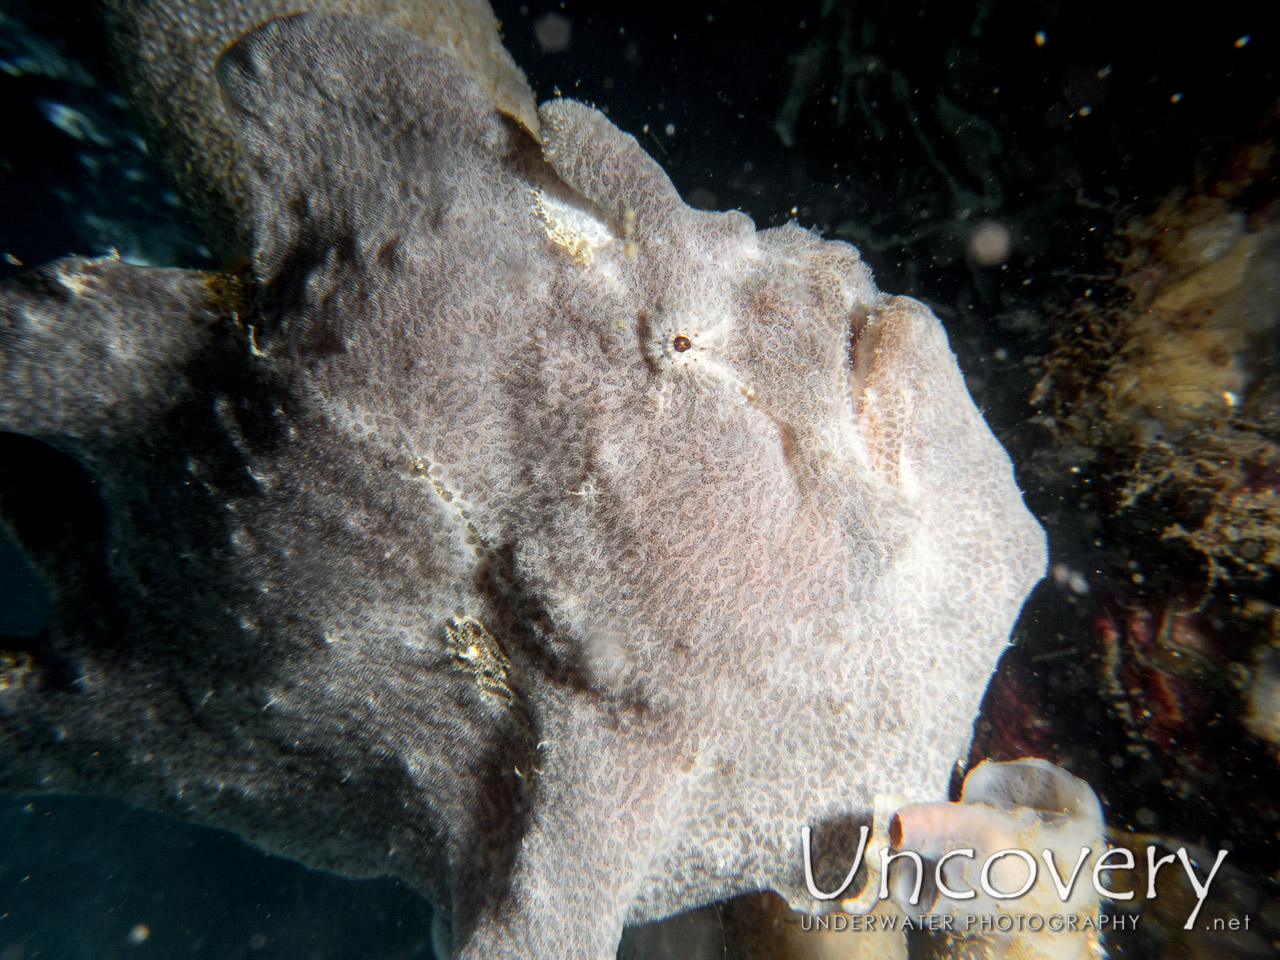 Giant Frogfish (antennarius Commerson), photo taken in Indonesia, North Sulawesi, Lembeh Strait, Nudi Falls